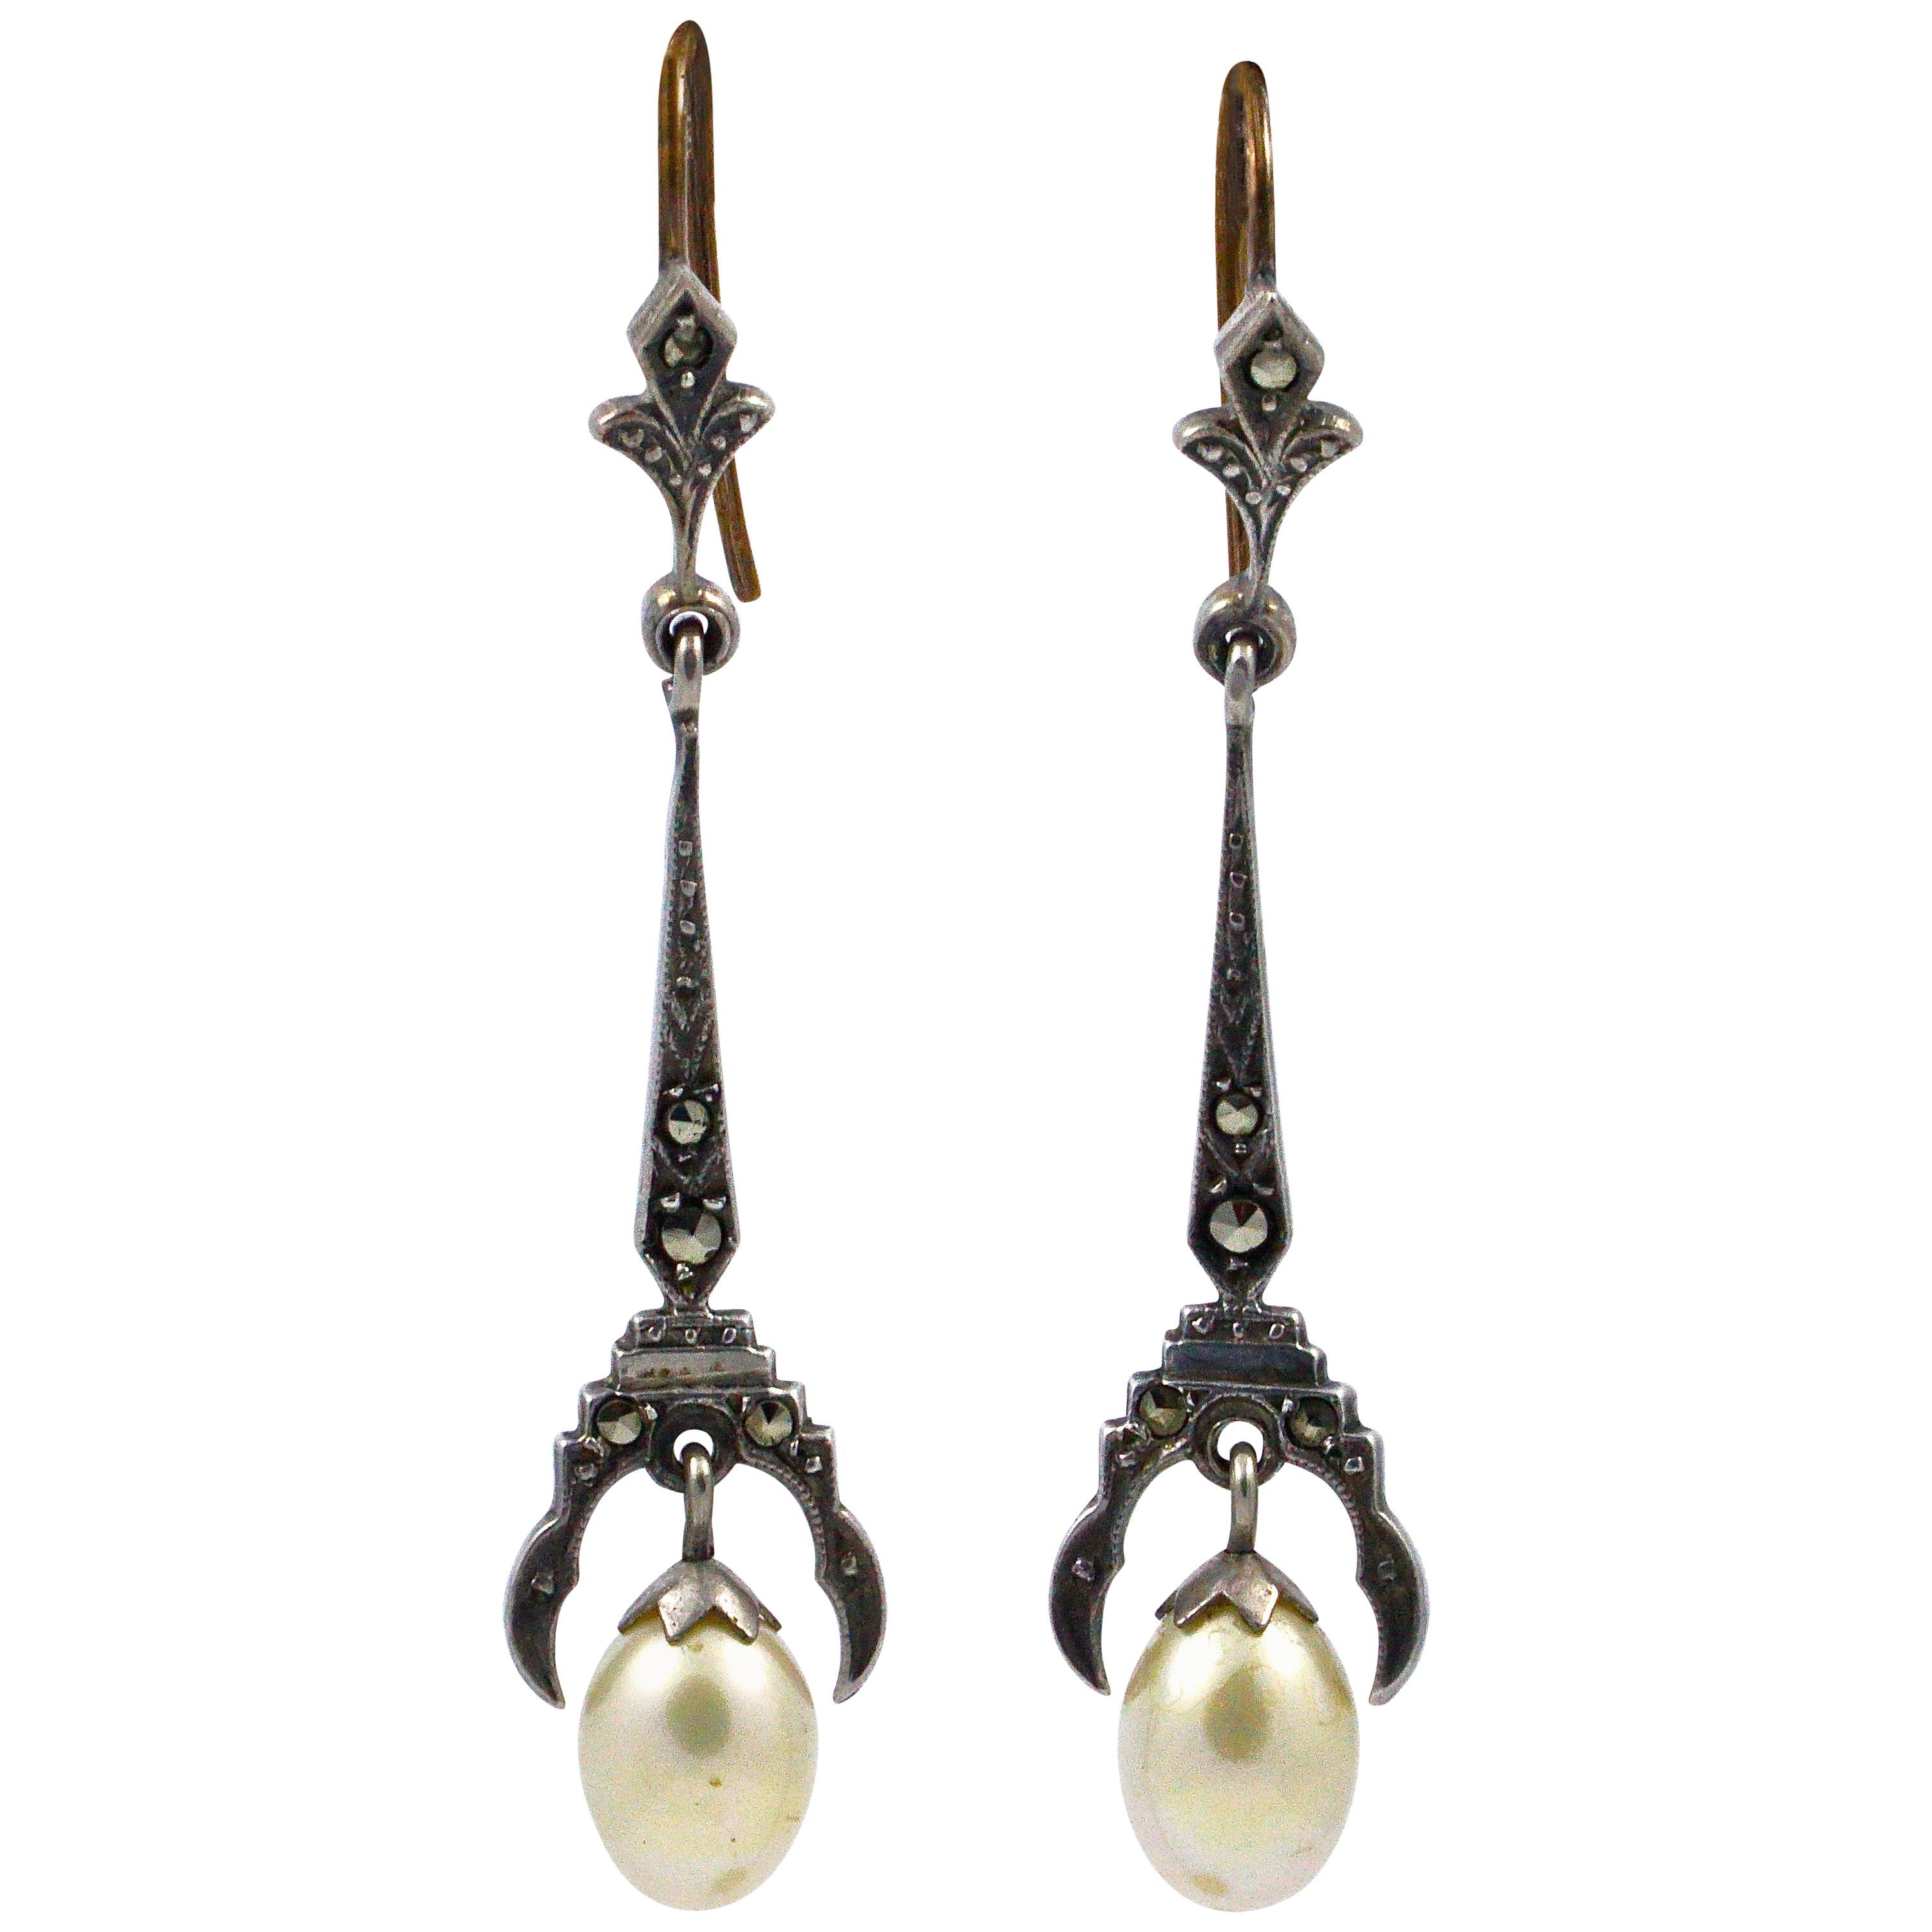 Natural White Sea PEARL Vintage Earrings Pair Silver Plated FASHIONABLE Jewelry 